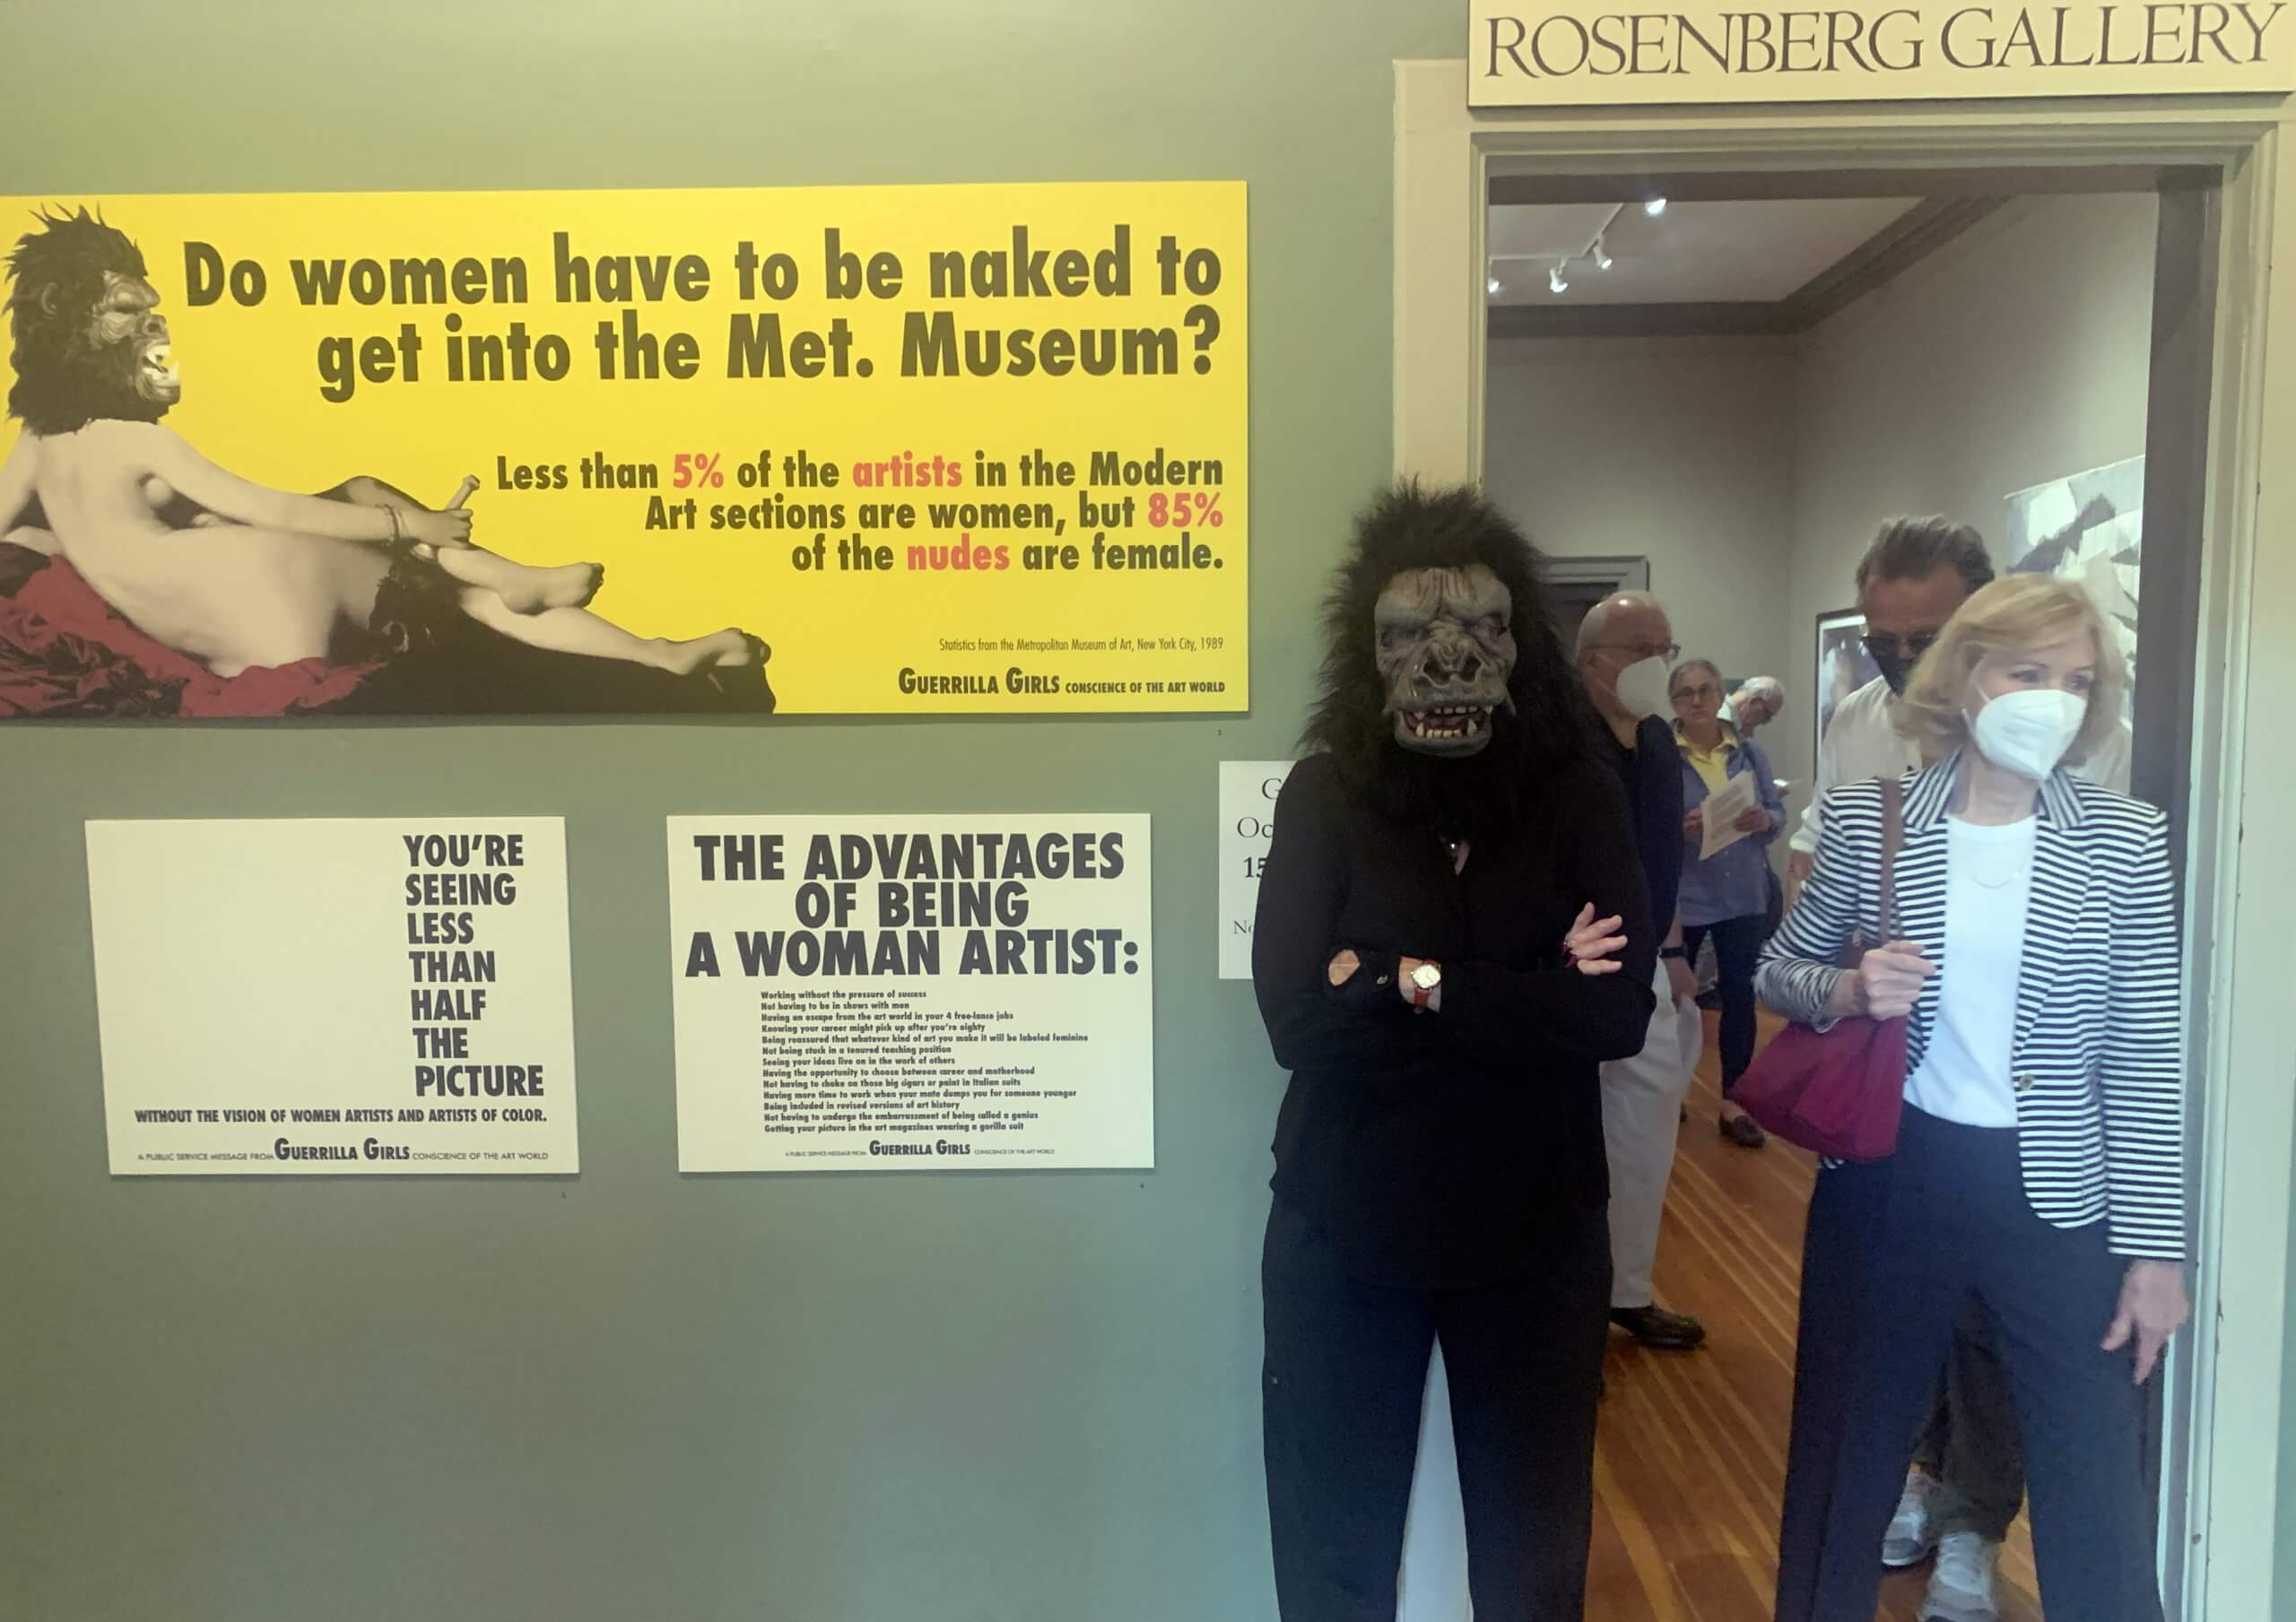 Guerrilla Girl at the Event